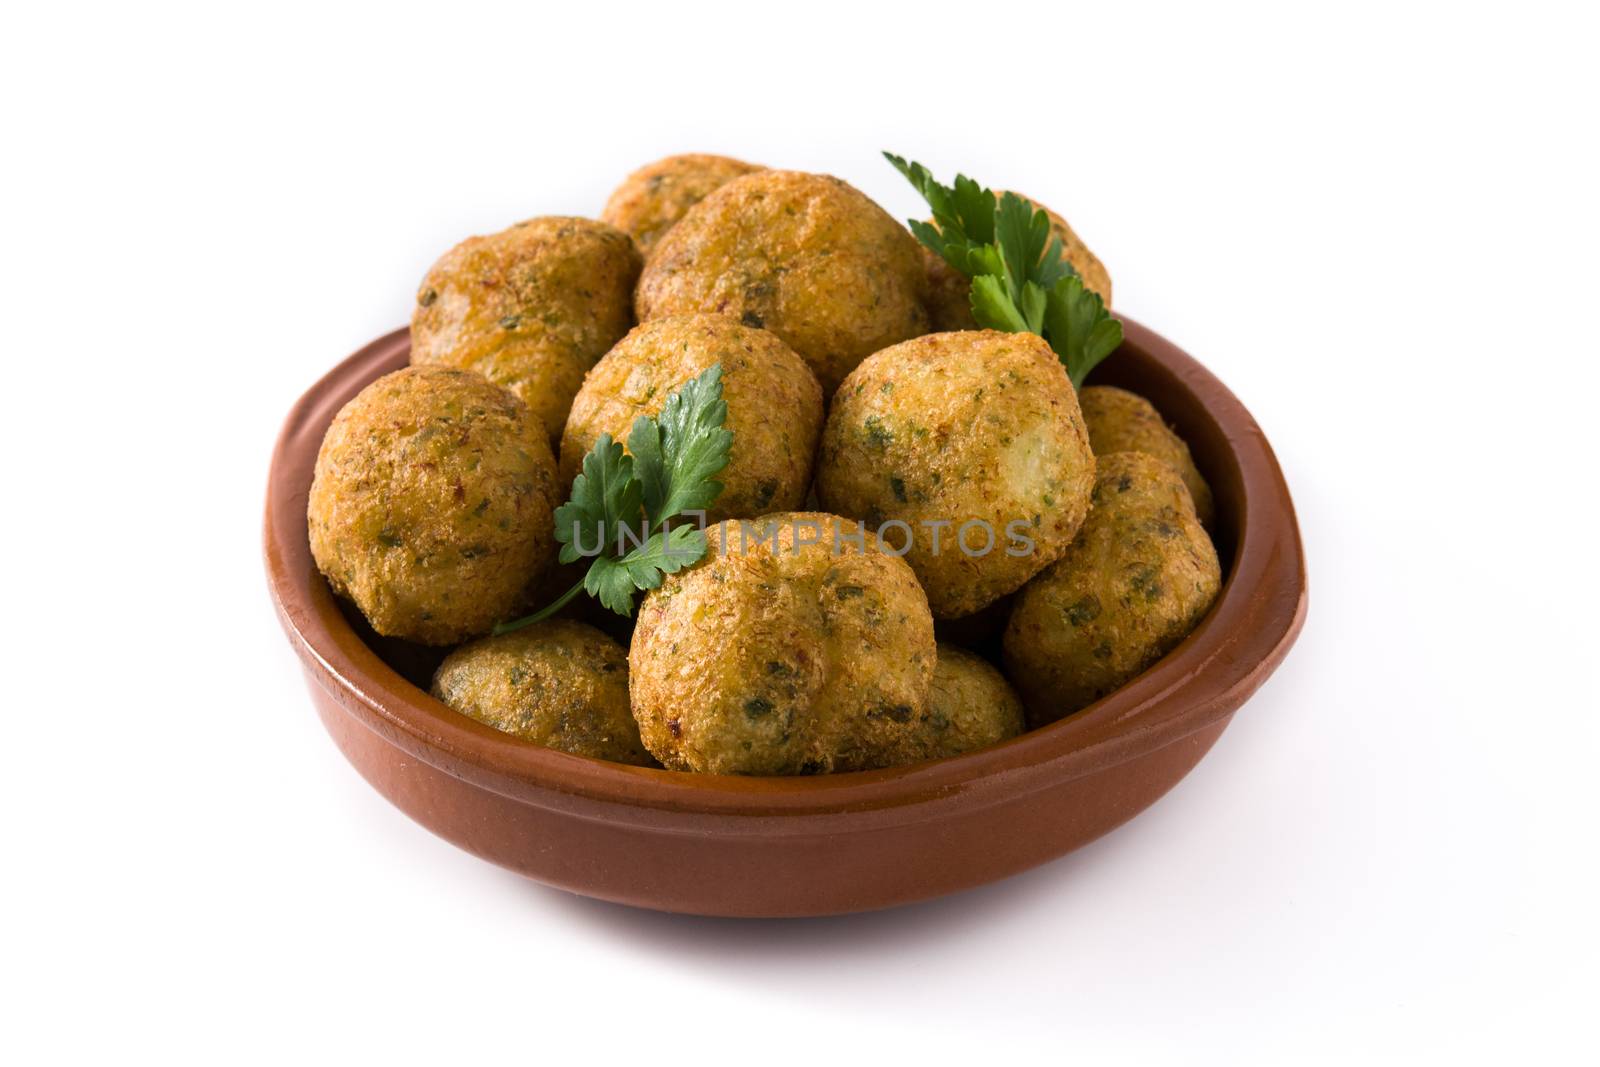 Traditional cod fritters decorated with garlic and parsley isolated on white background